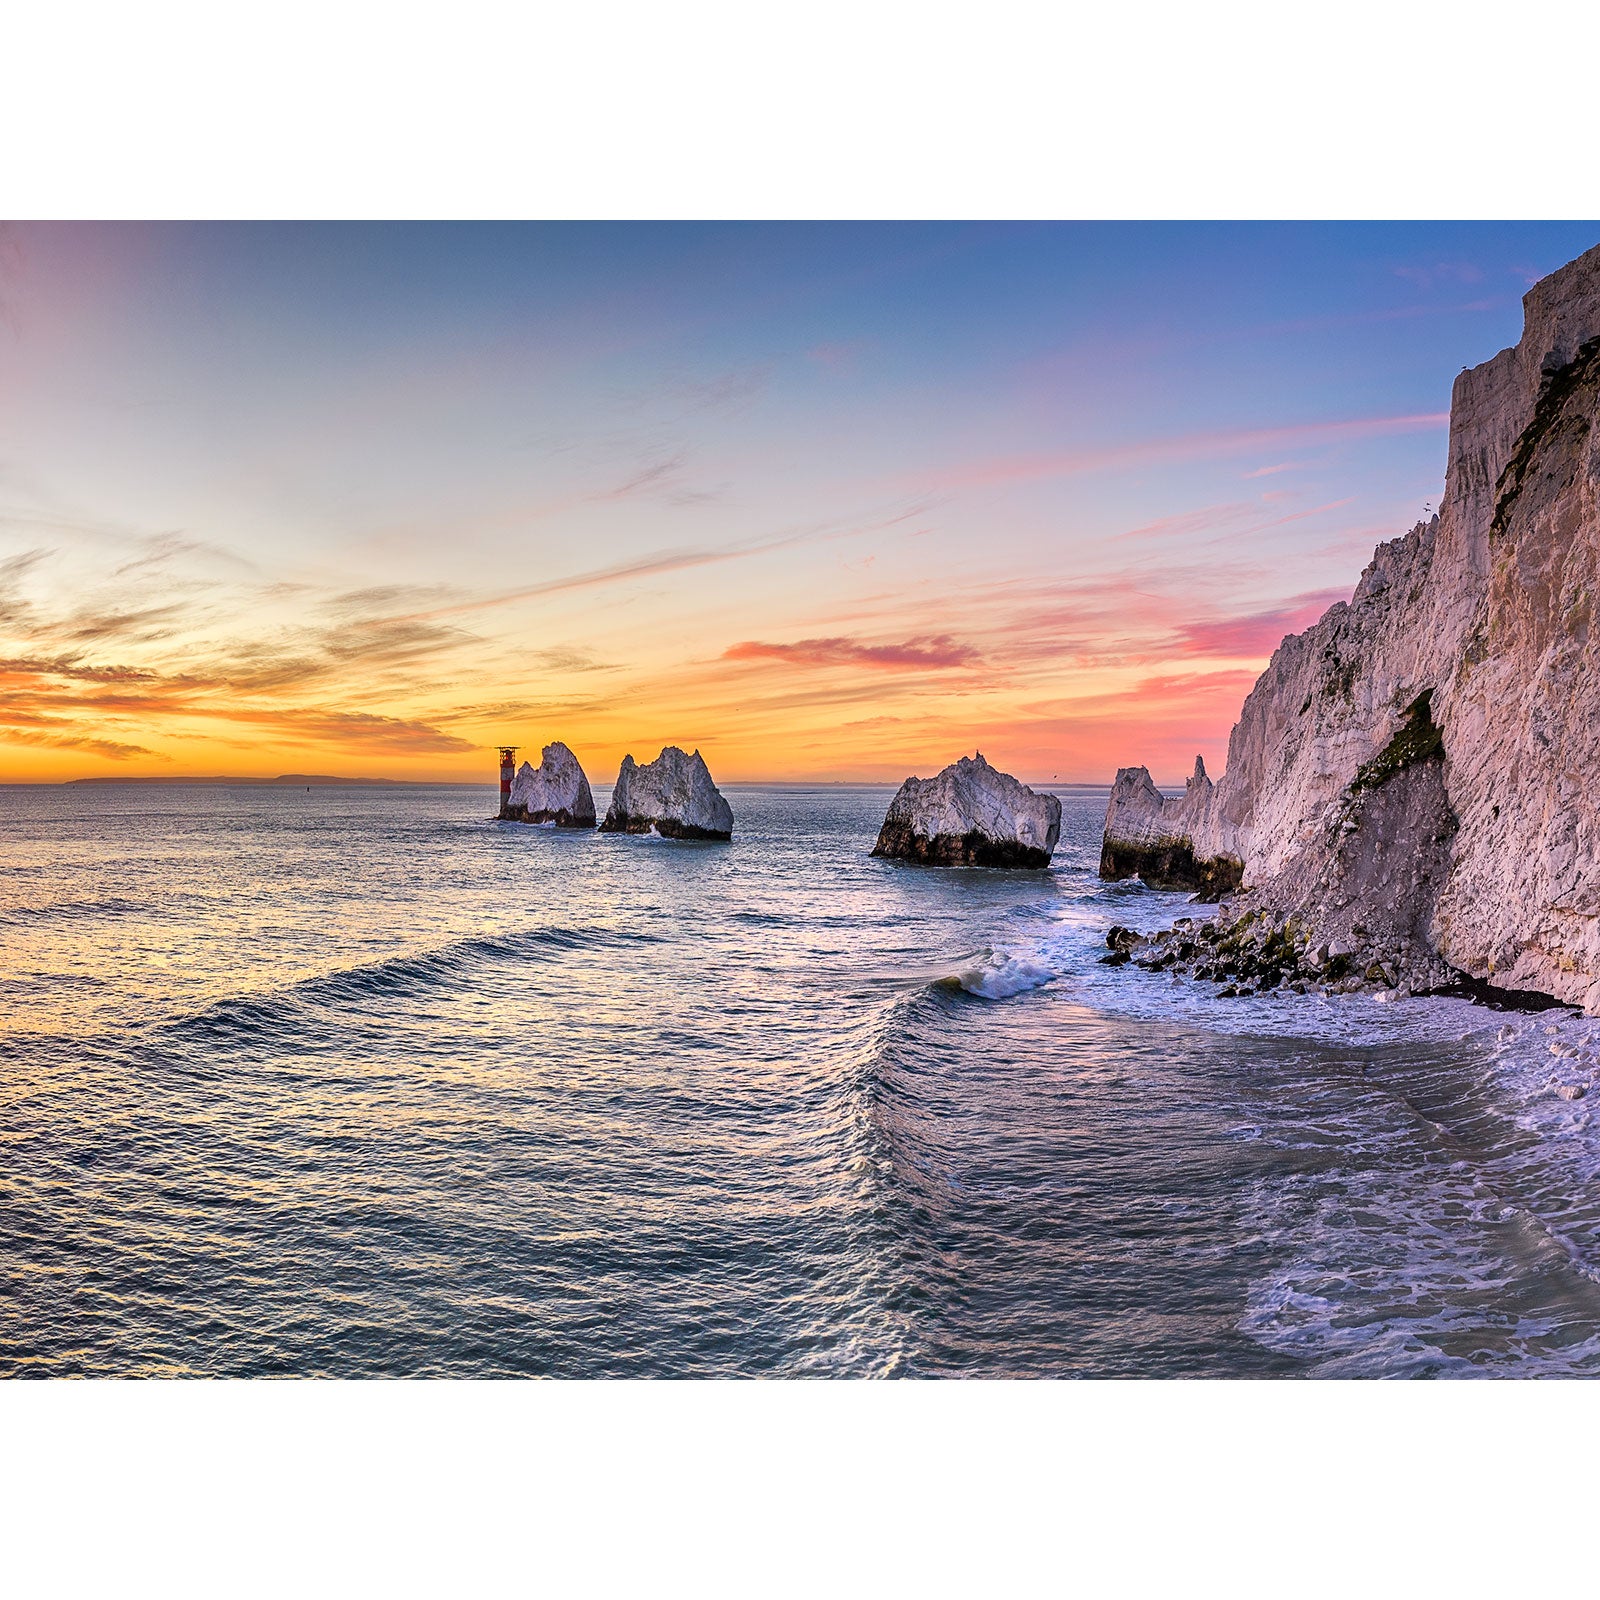 A tranquil sunset over a coastal seascape with waves breaking near the shore and rock formations in the Isle of Wight captured by Available Light Photography's The Needles.